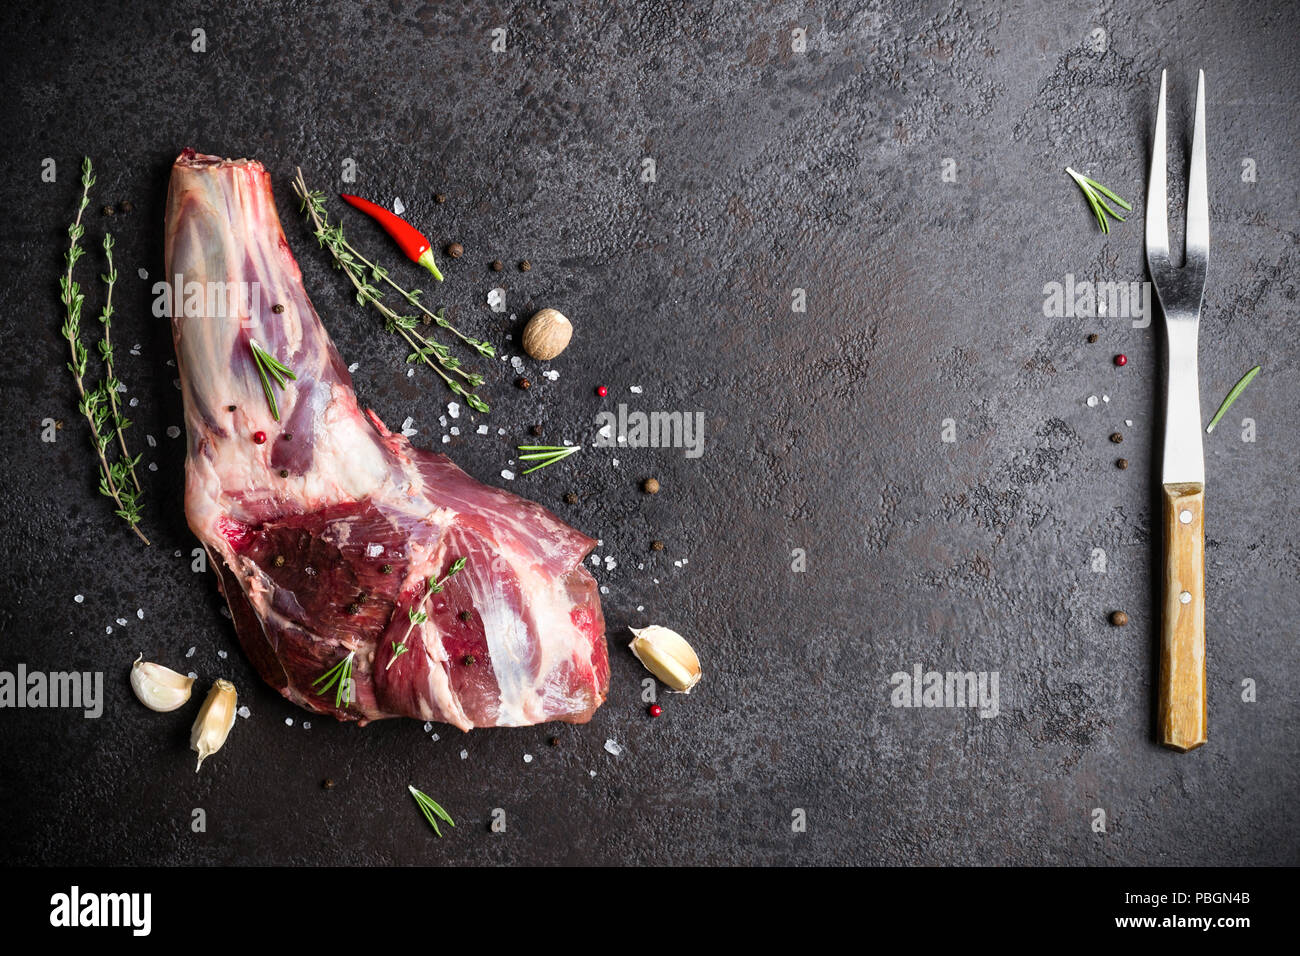 Raw fresh Lamb Meat shank, herbs and fork on black stone background. Stock Photo